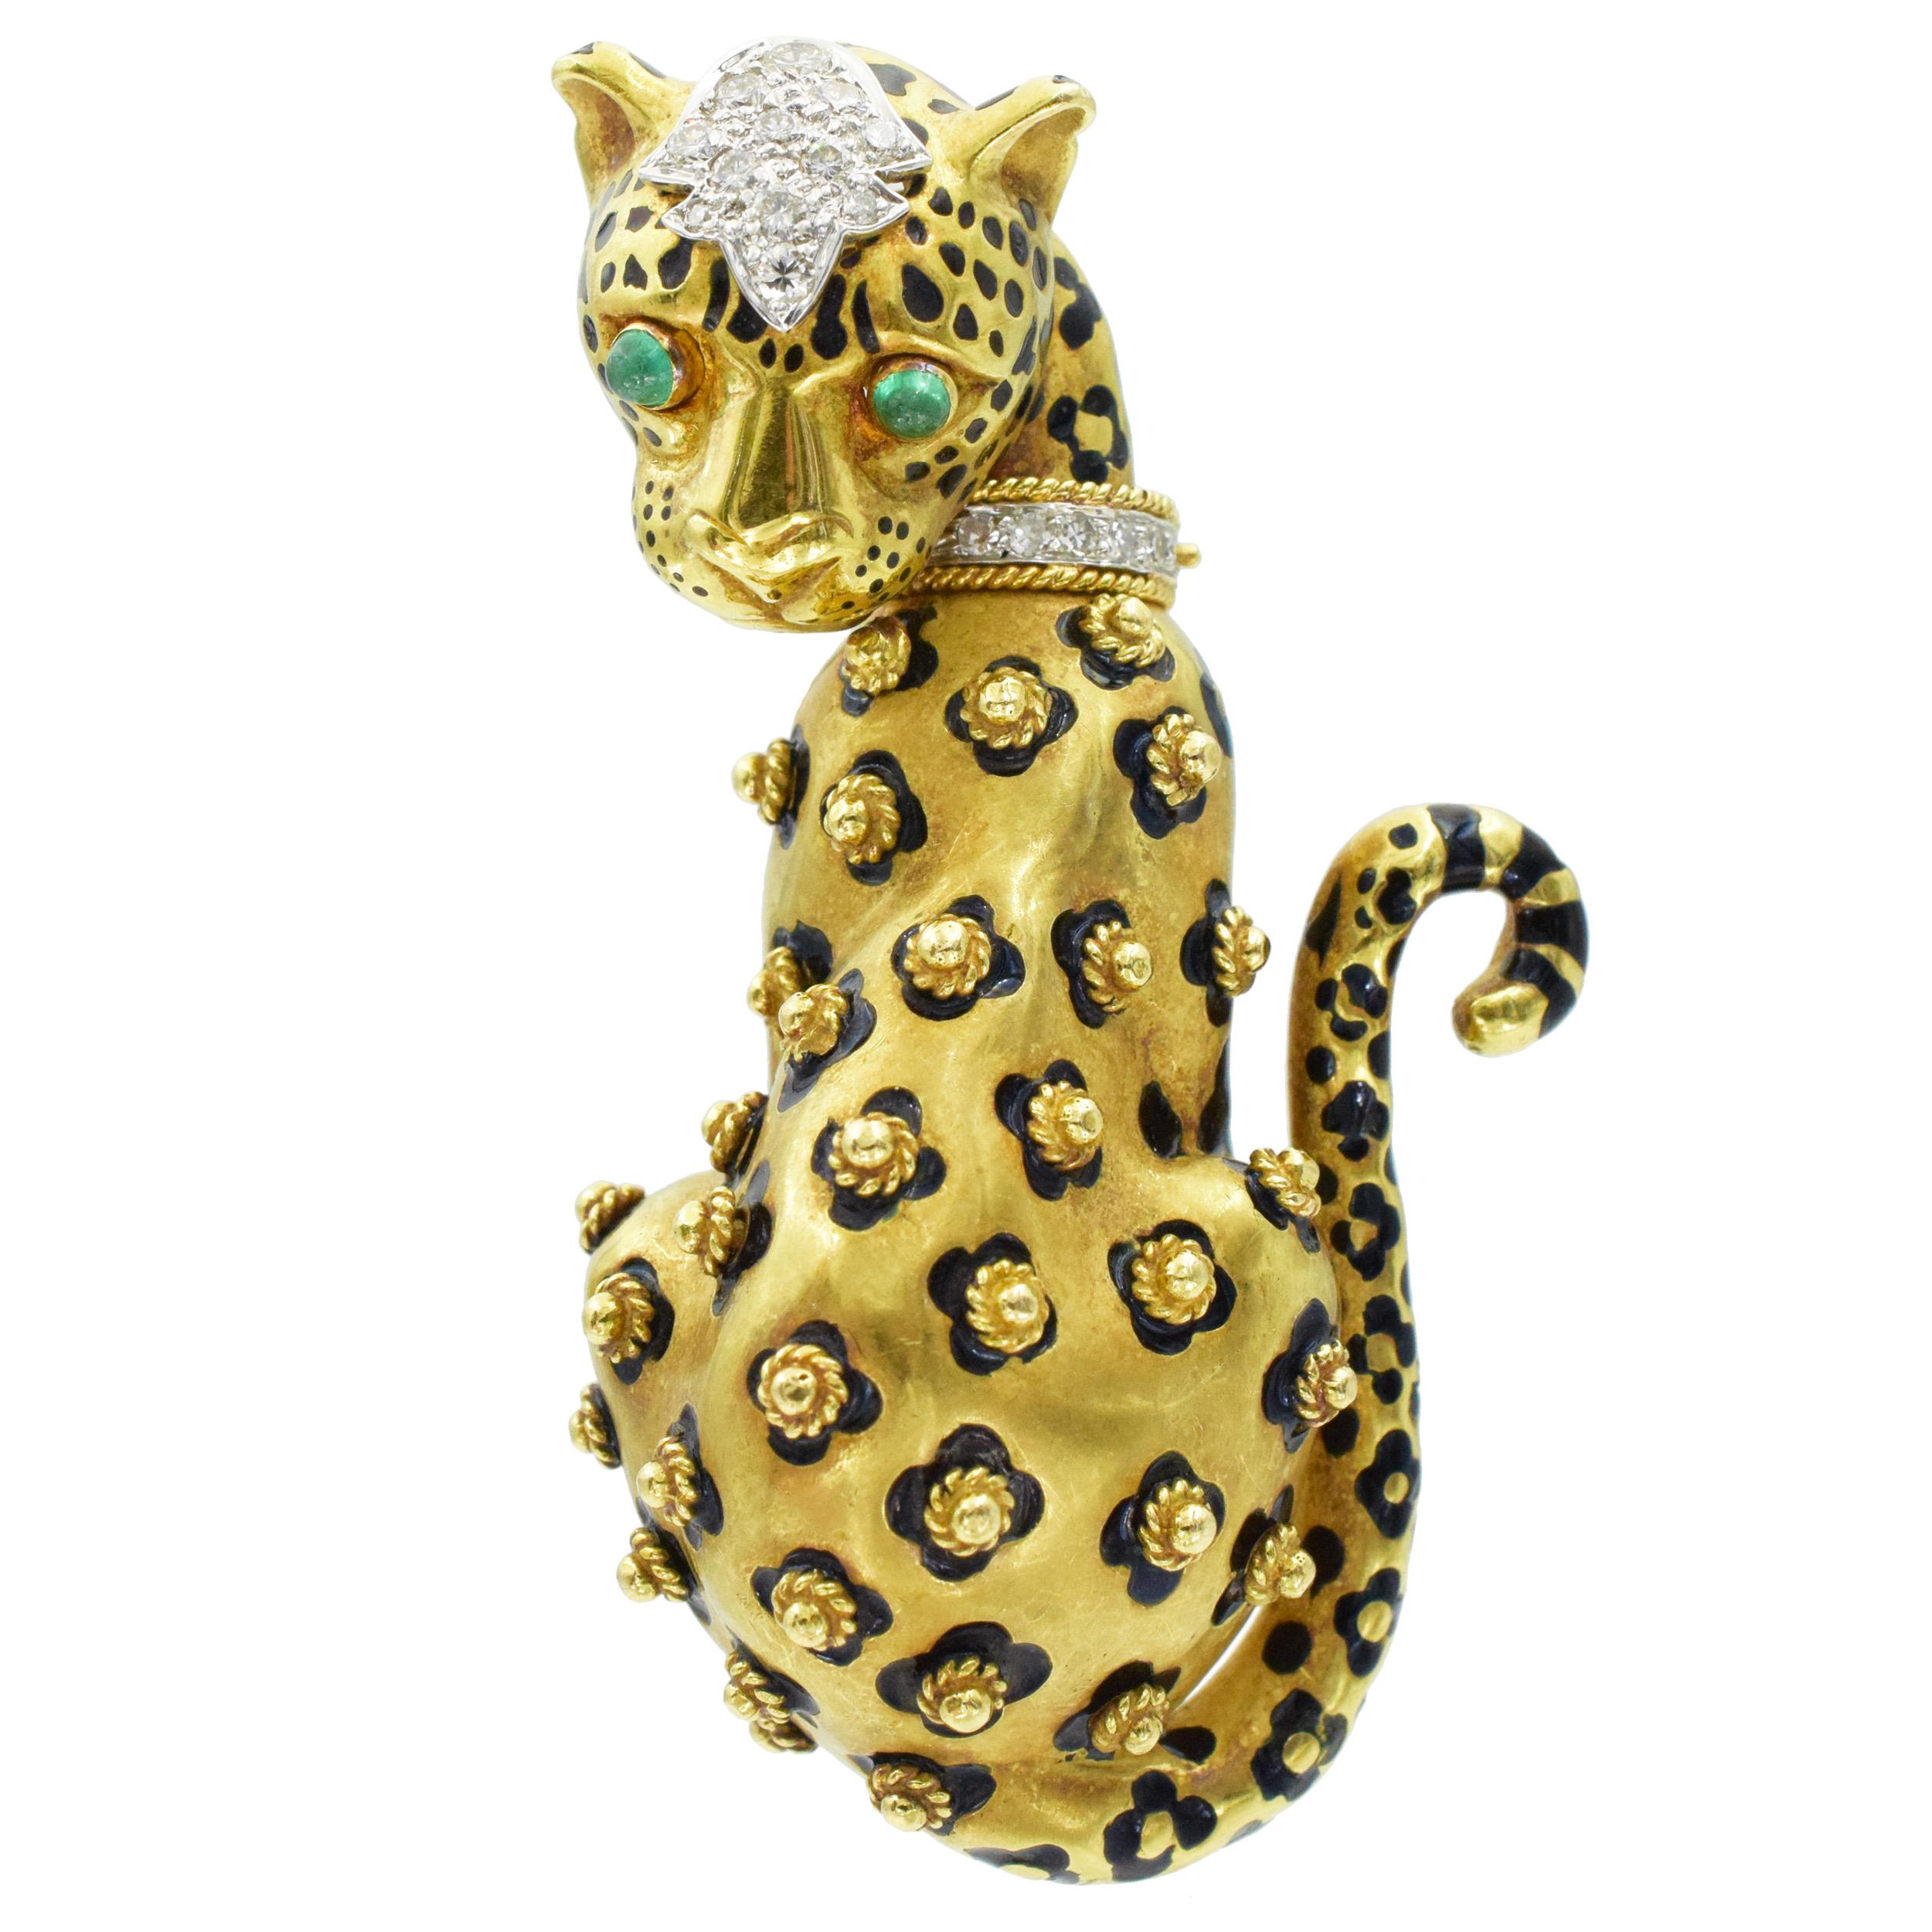 Gold, Diamond, Enamel, and Emerald Leopard Brooch by David Webb This brooch pin has a sitting leopard motif in 18k yellow gold with 2 cabochon emerald eyes in 18k yellow gold along with diamonds in the collar and head (18 round diamonds weighing